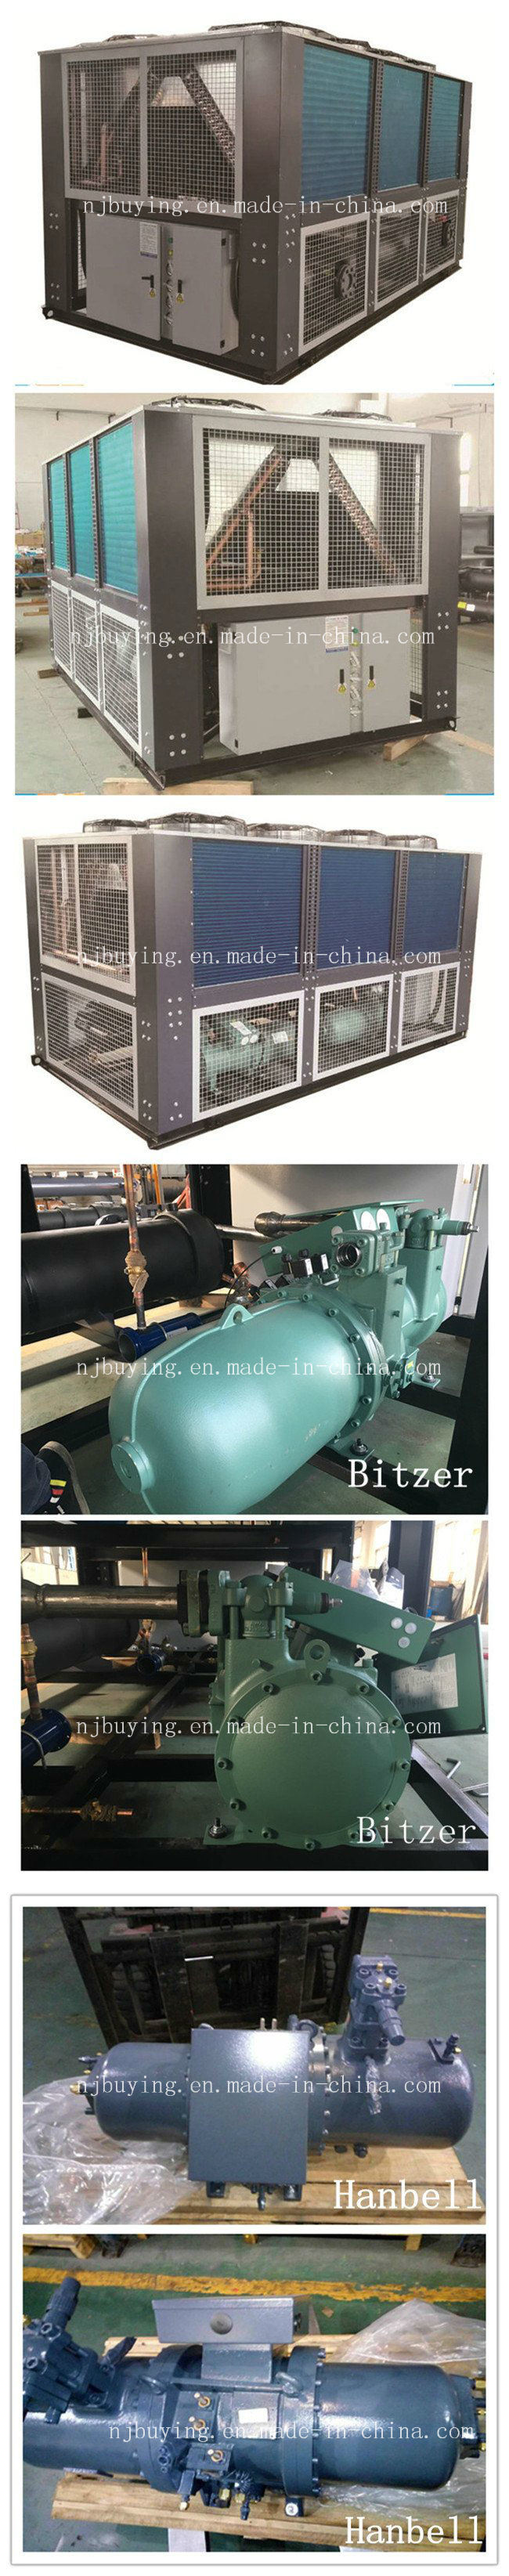 Hydraulic Industrial Air Cooled Screw Water Chiller with Single Compressor